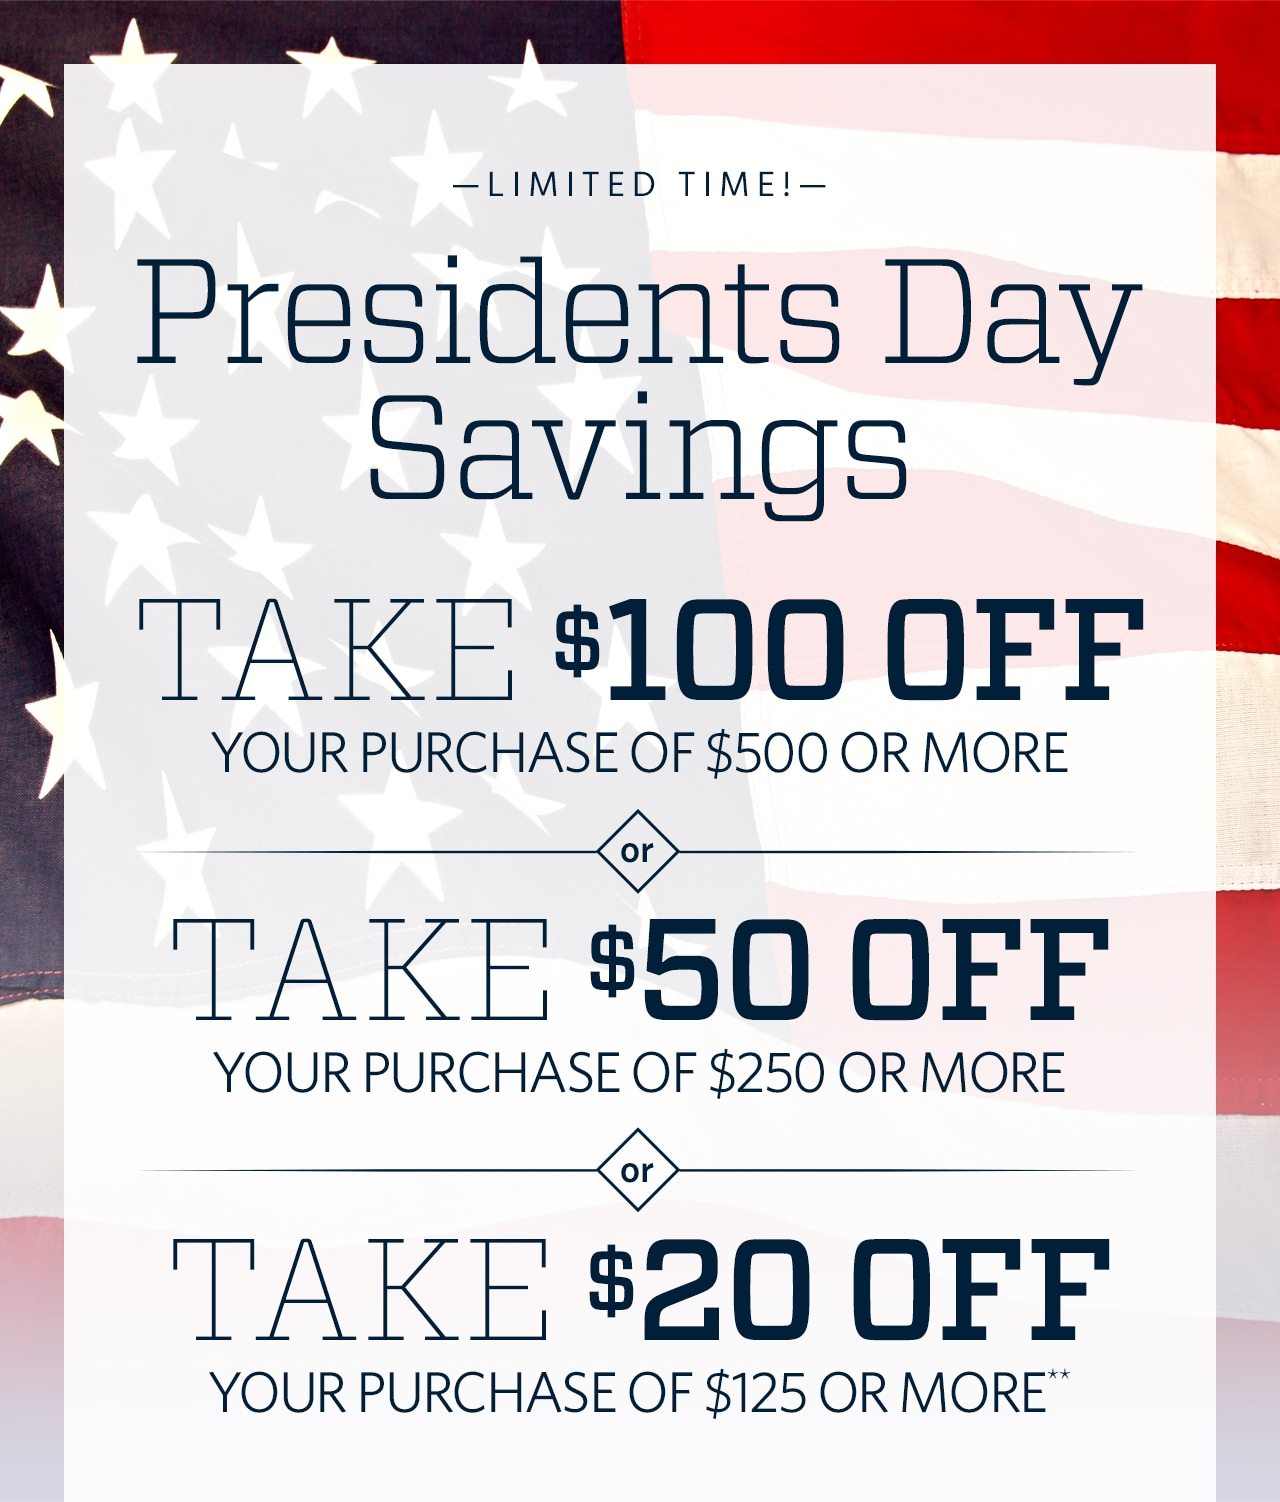 Limited Time! Presidents Day Savings. Take $100 Off Your Purchase of $500 or More or Take $50 Off Your Purchase of $250 or More or Take $20 Off Your Purchase of $125 or More**